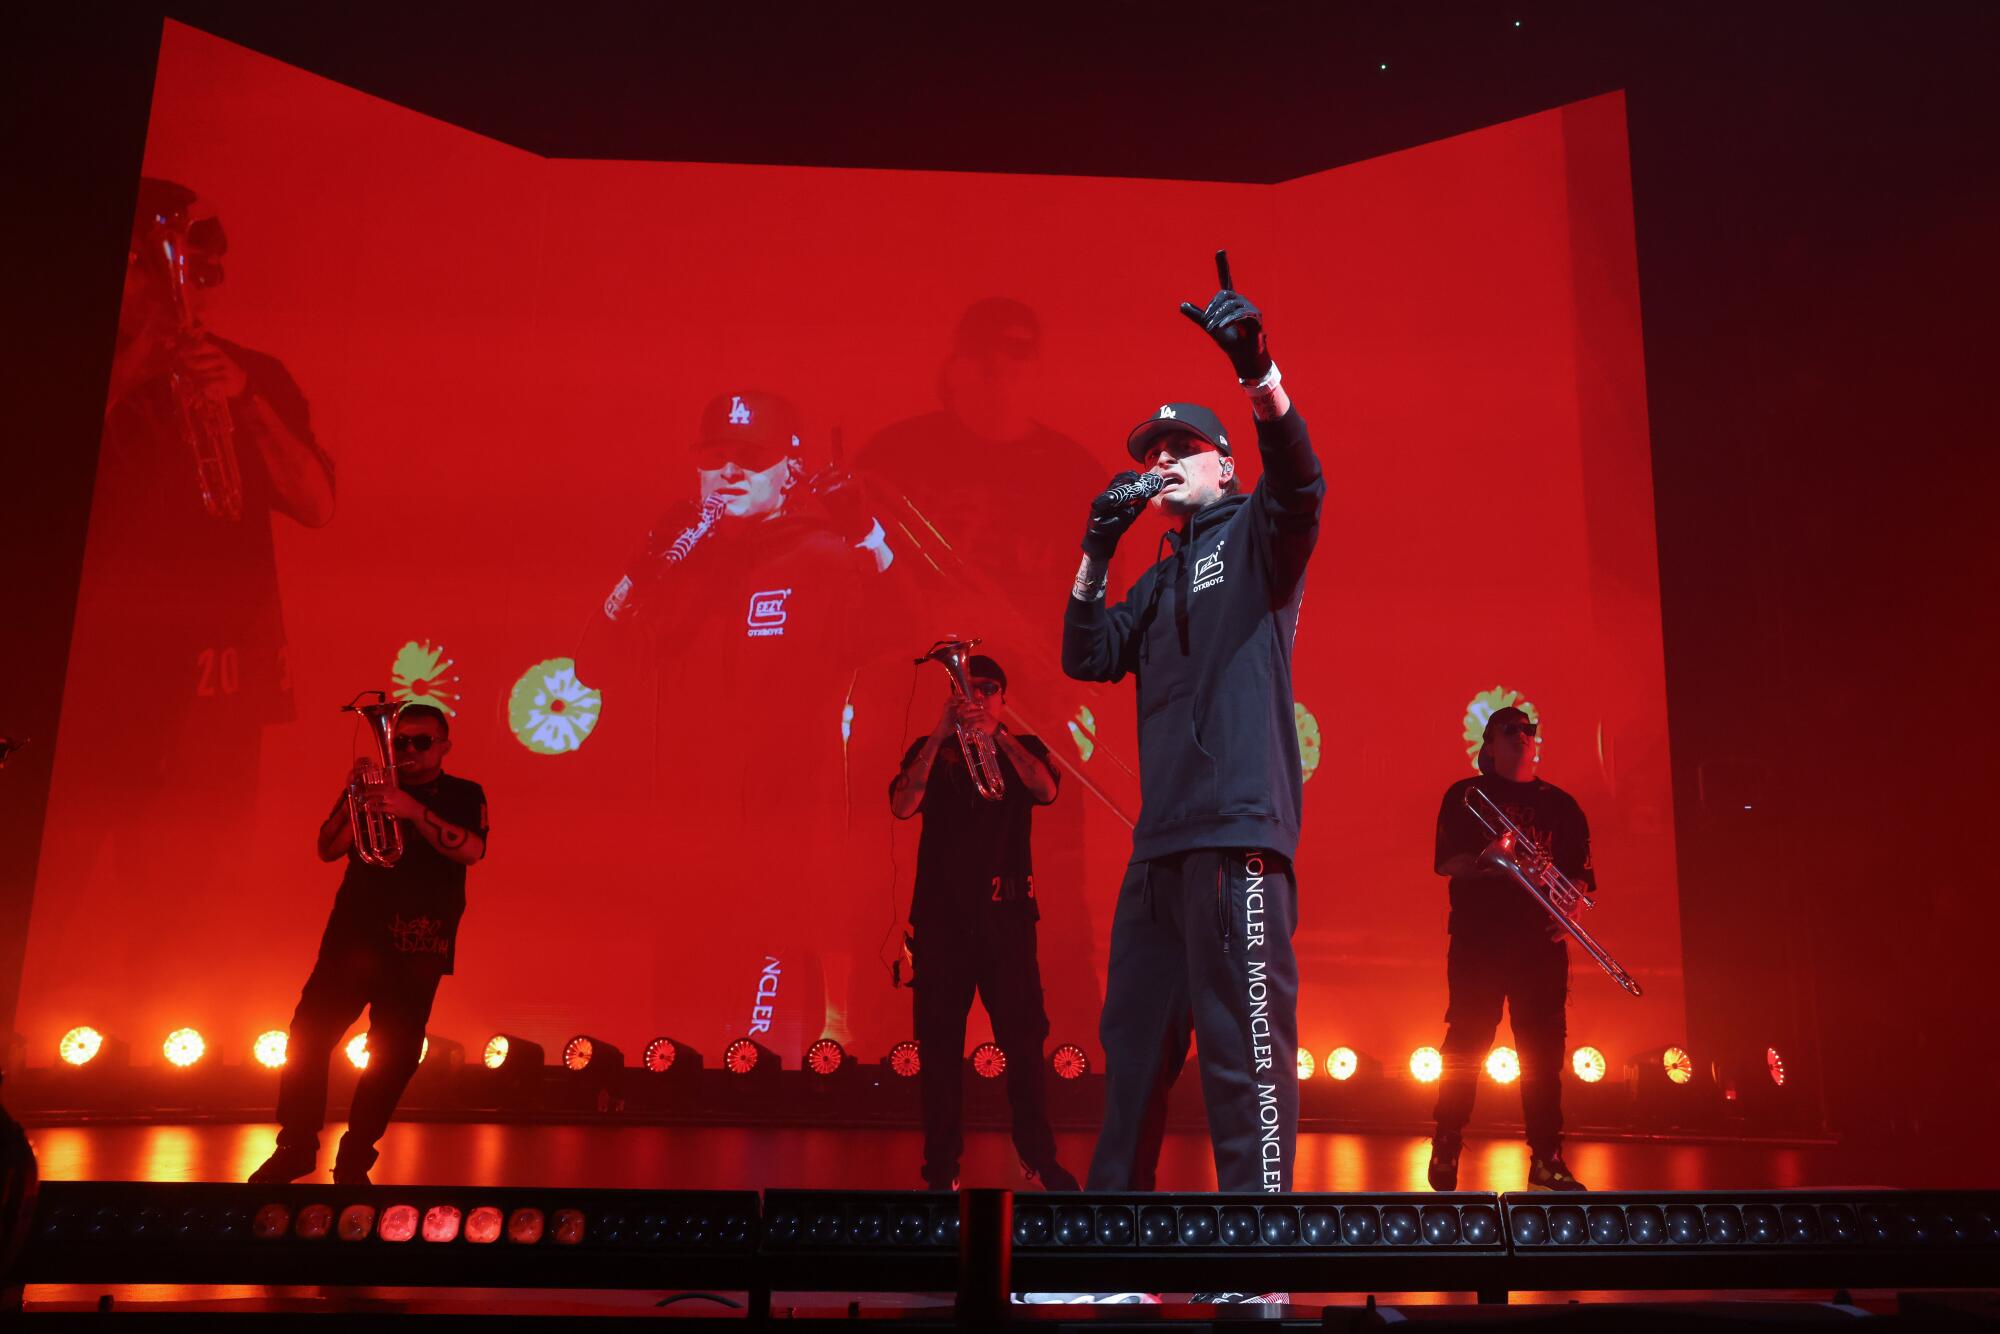 Peso Pluma in a black outfit with musicians playing behind him on a stage with a red screen backdrop.